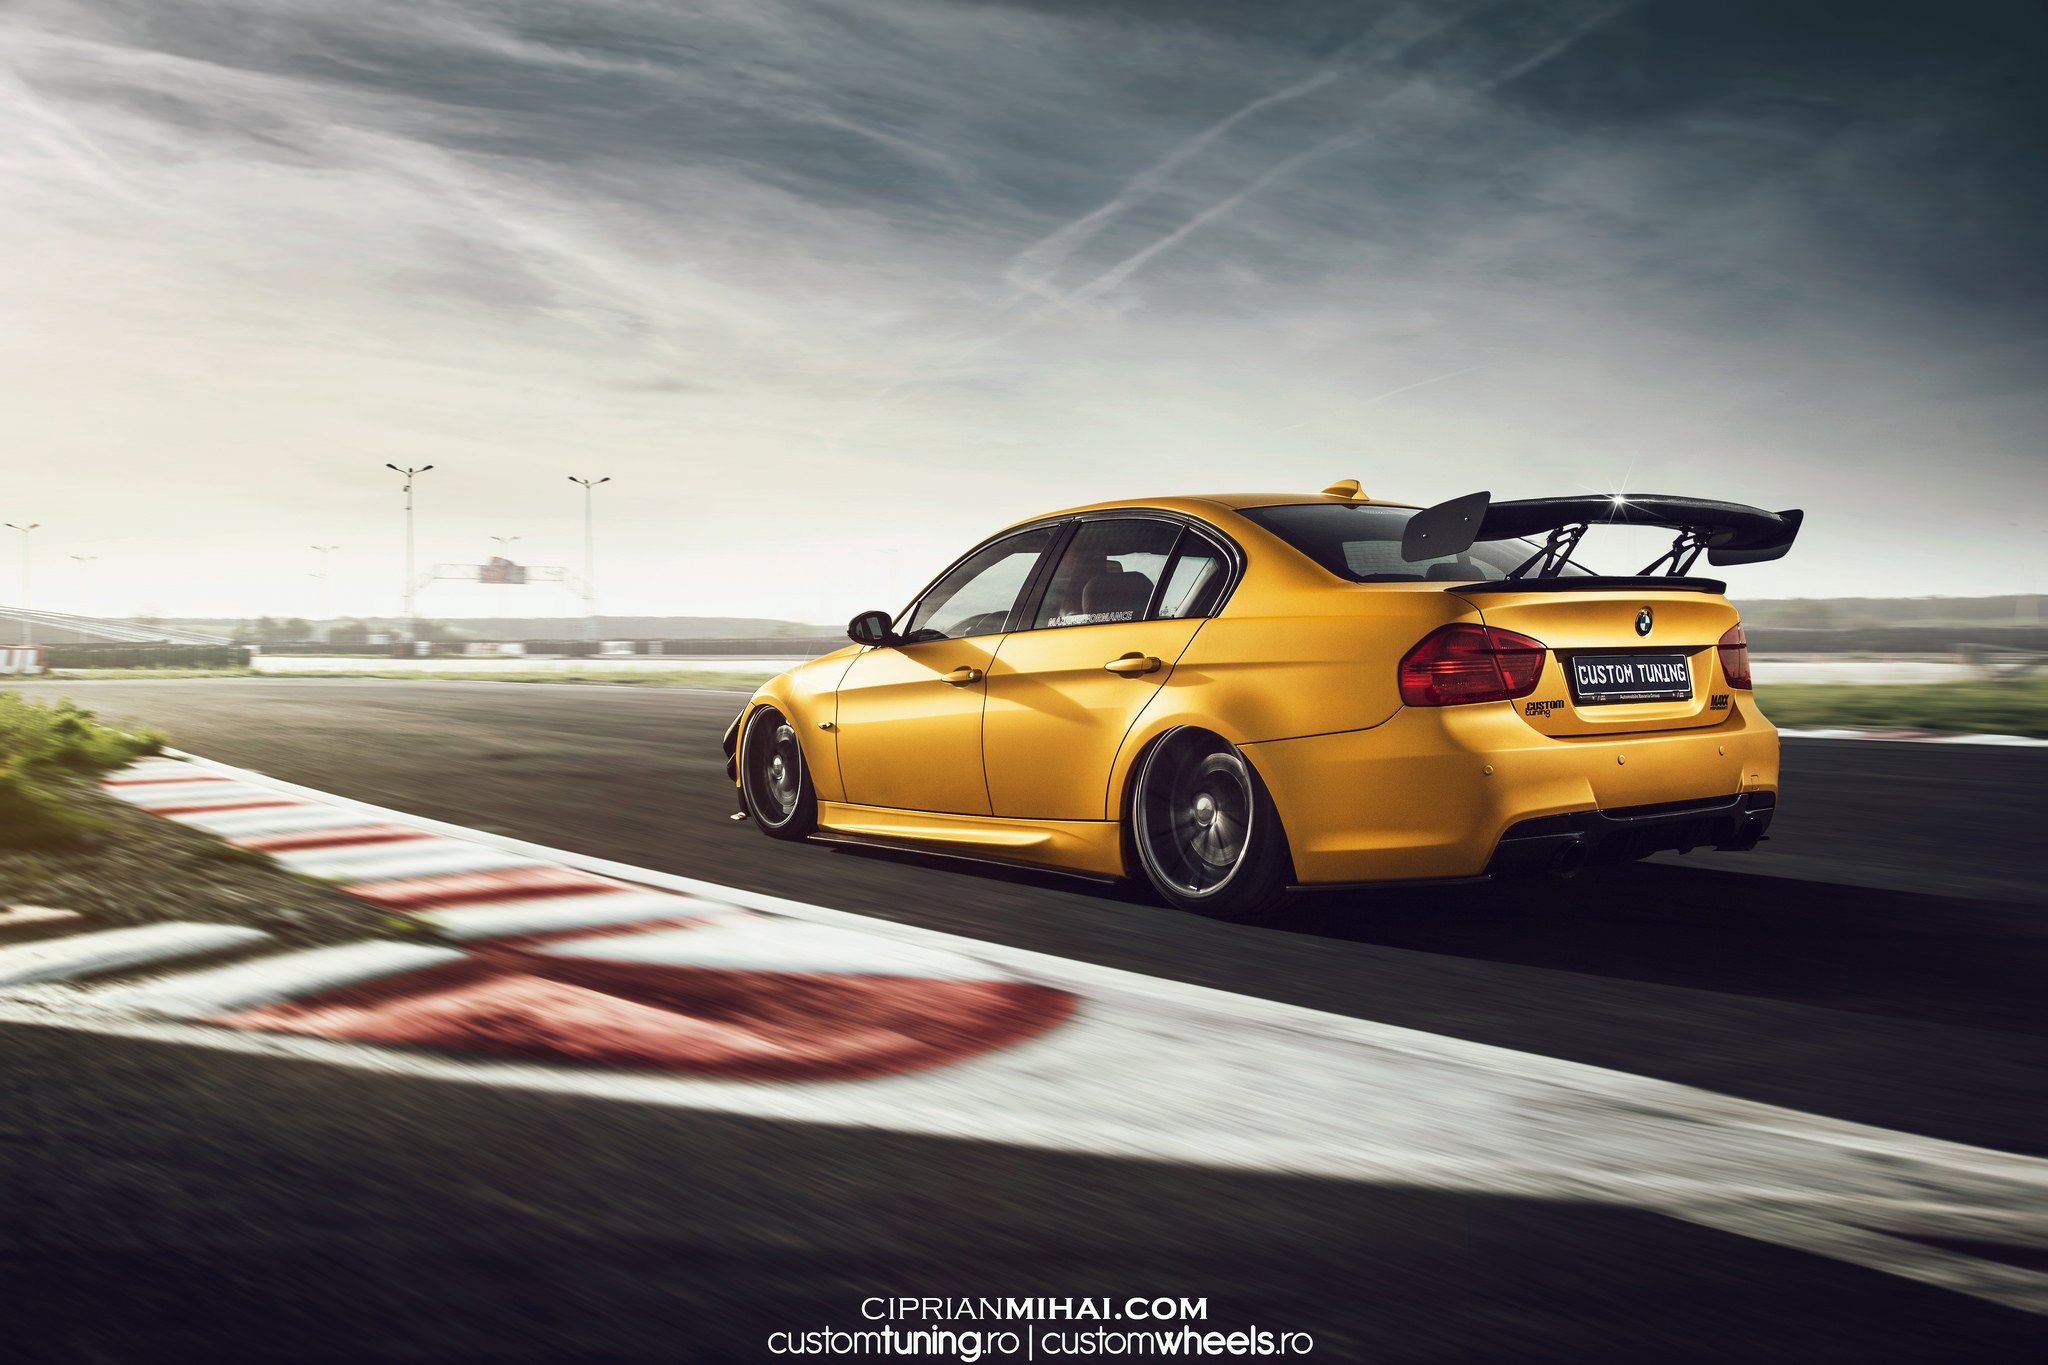 Large Wing Spoiler on Yellow BMW 3-Series - Photo by Ciprian Mihai